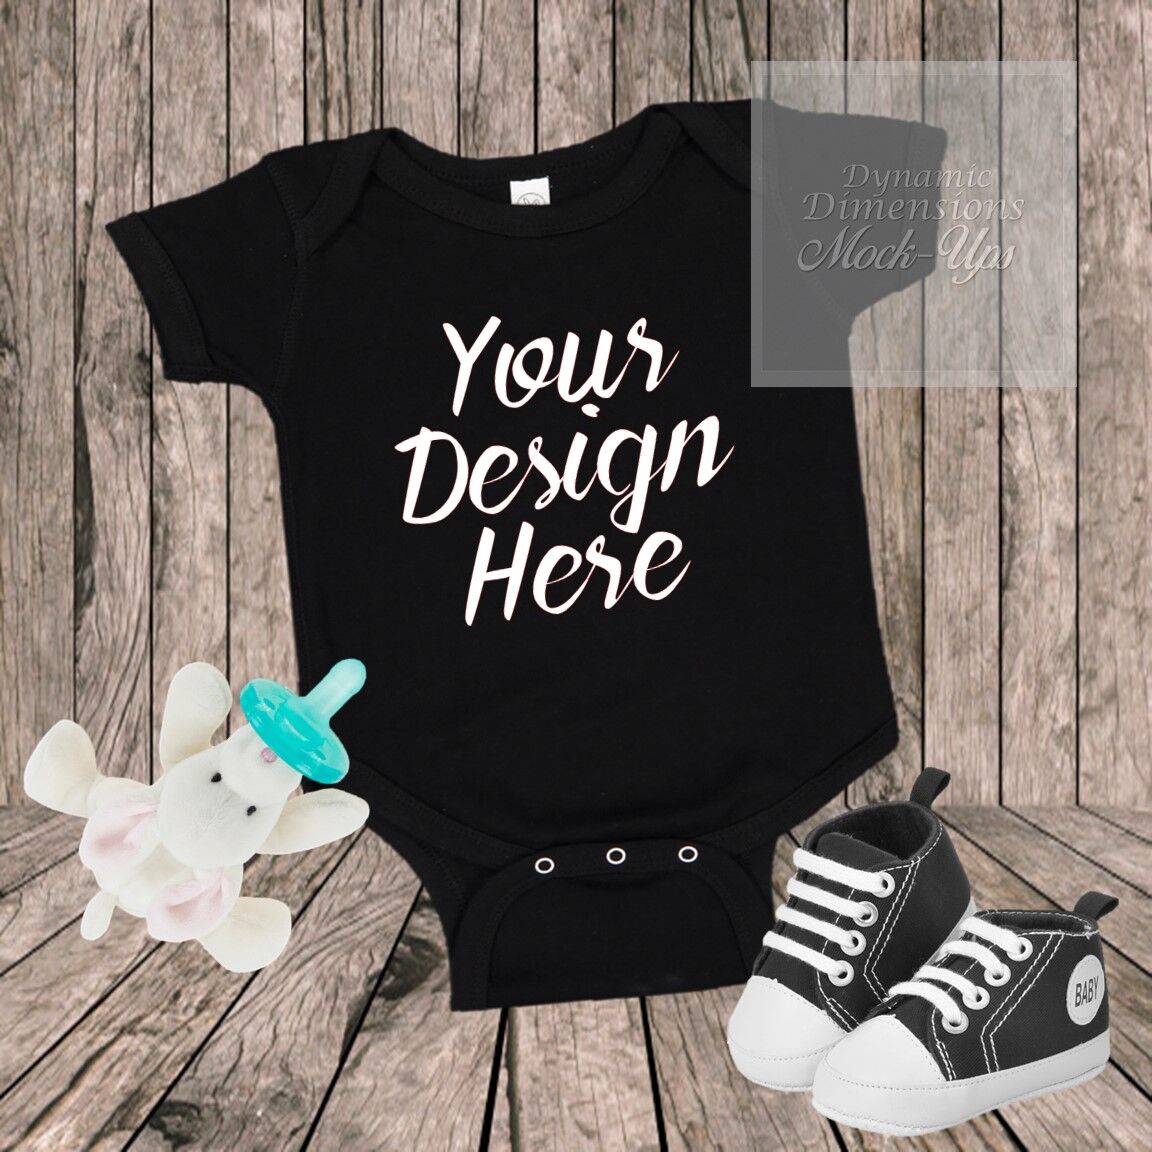 Blank Black Baby Onesie Mockup, Fashion Design Styled Stock Photograp By Dynamic Dimensions ...